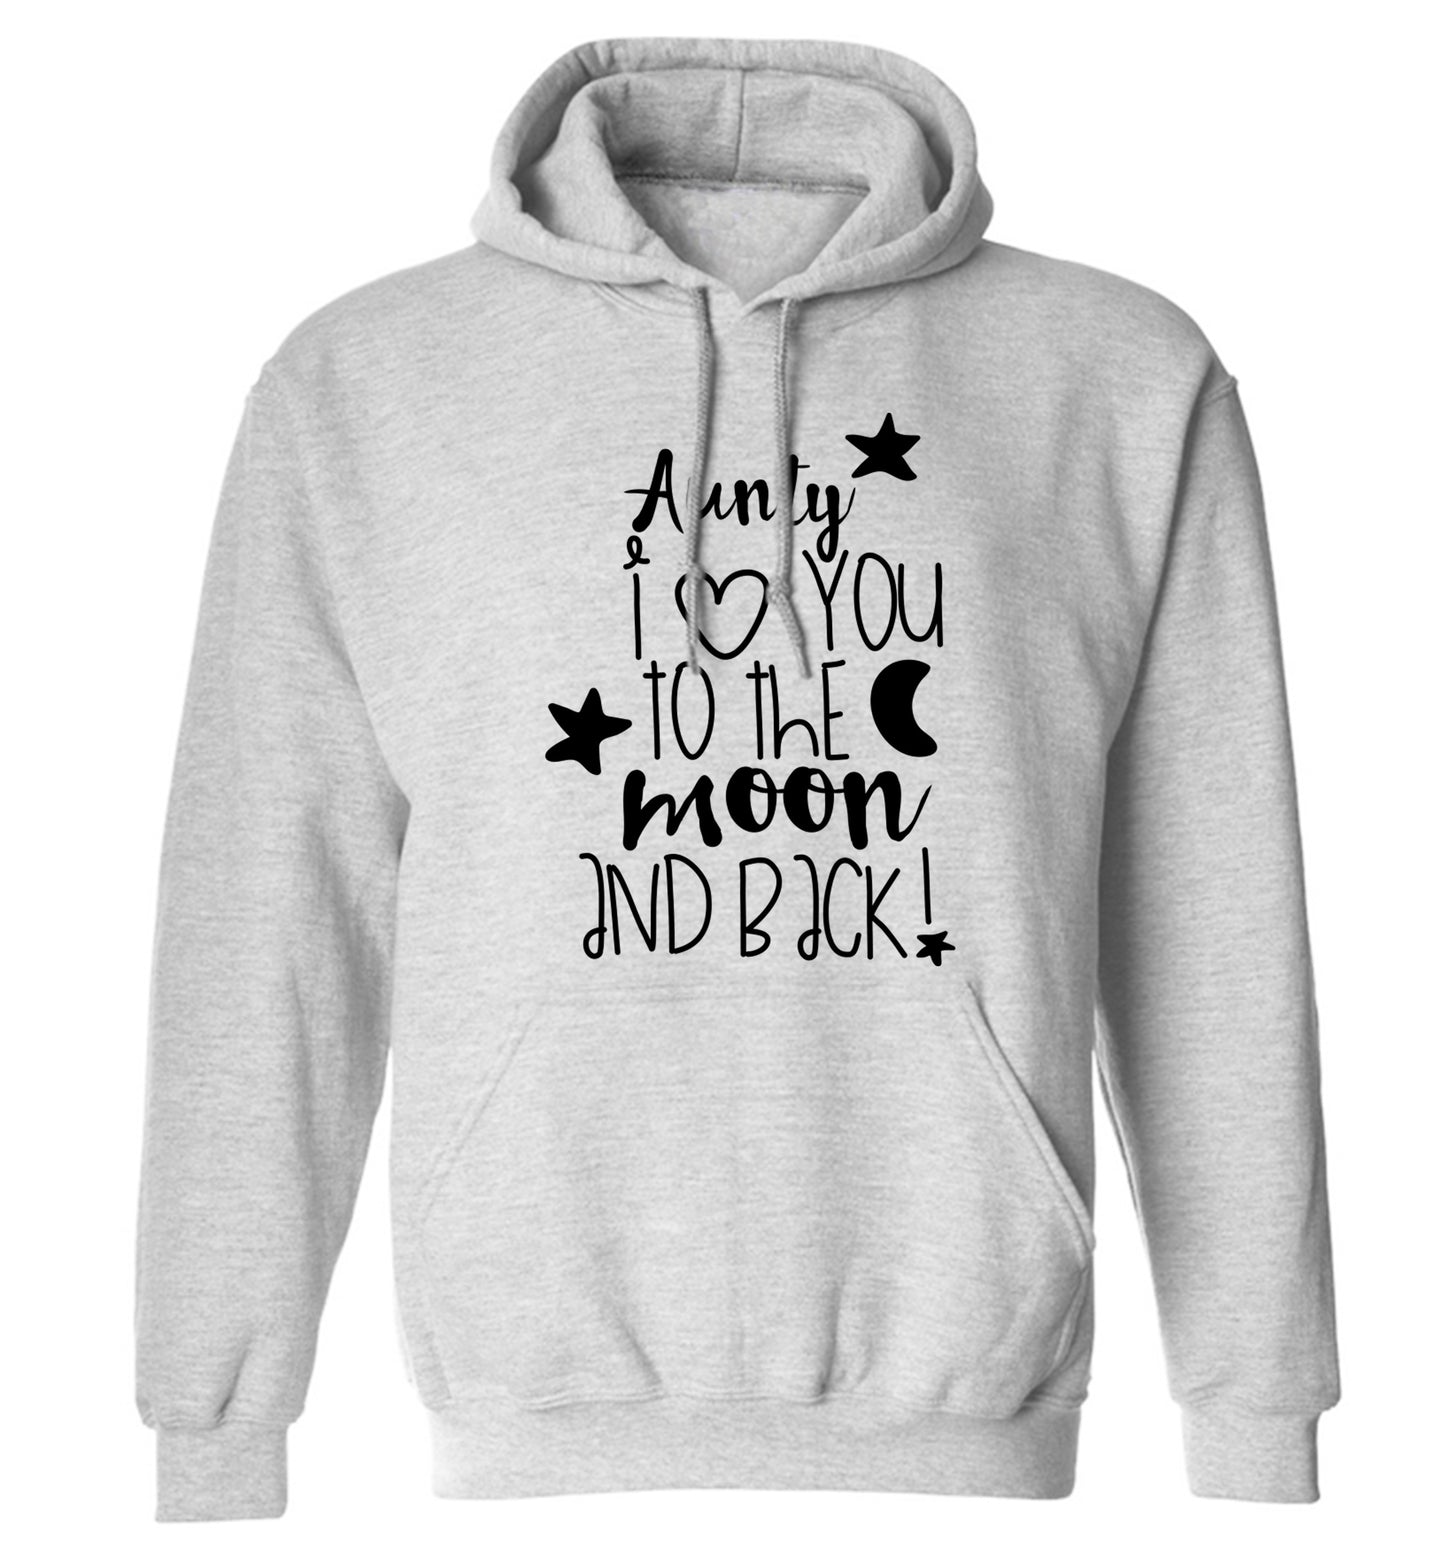 Aunty I love you to the moon and back adults unisex grey hoodie 2XL